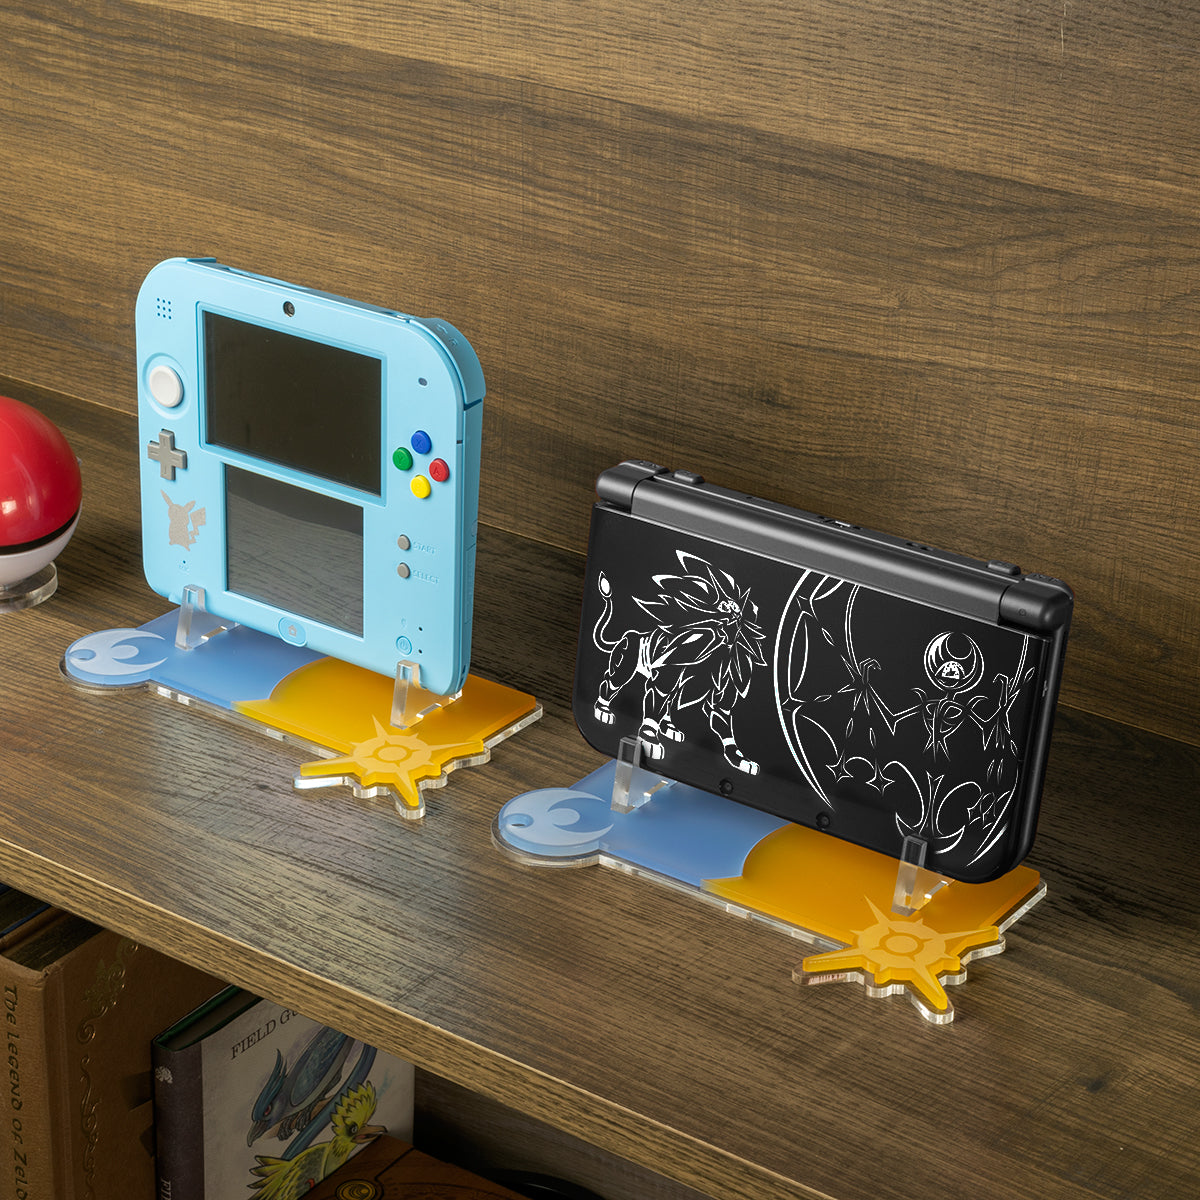 Pokémon Sun and Moon Edition New 3DS Display – Gaming